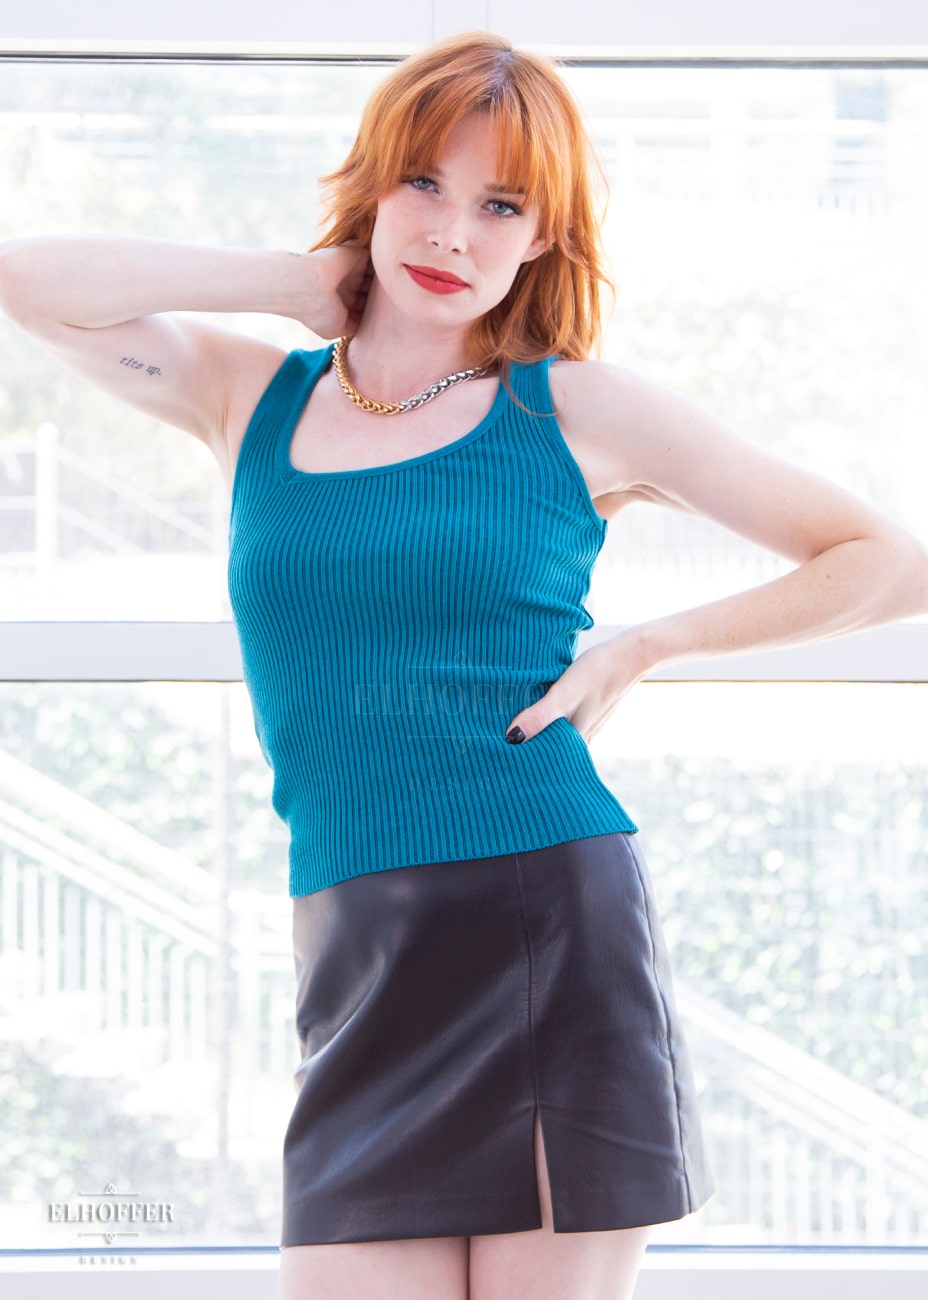 Chloe, a fair skinned XS model with red hair and bangs, is wearing a pullover sleeveless ribbed sweater tank with an asymmetrical neckline in teal.